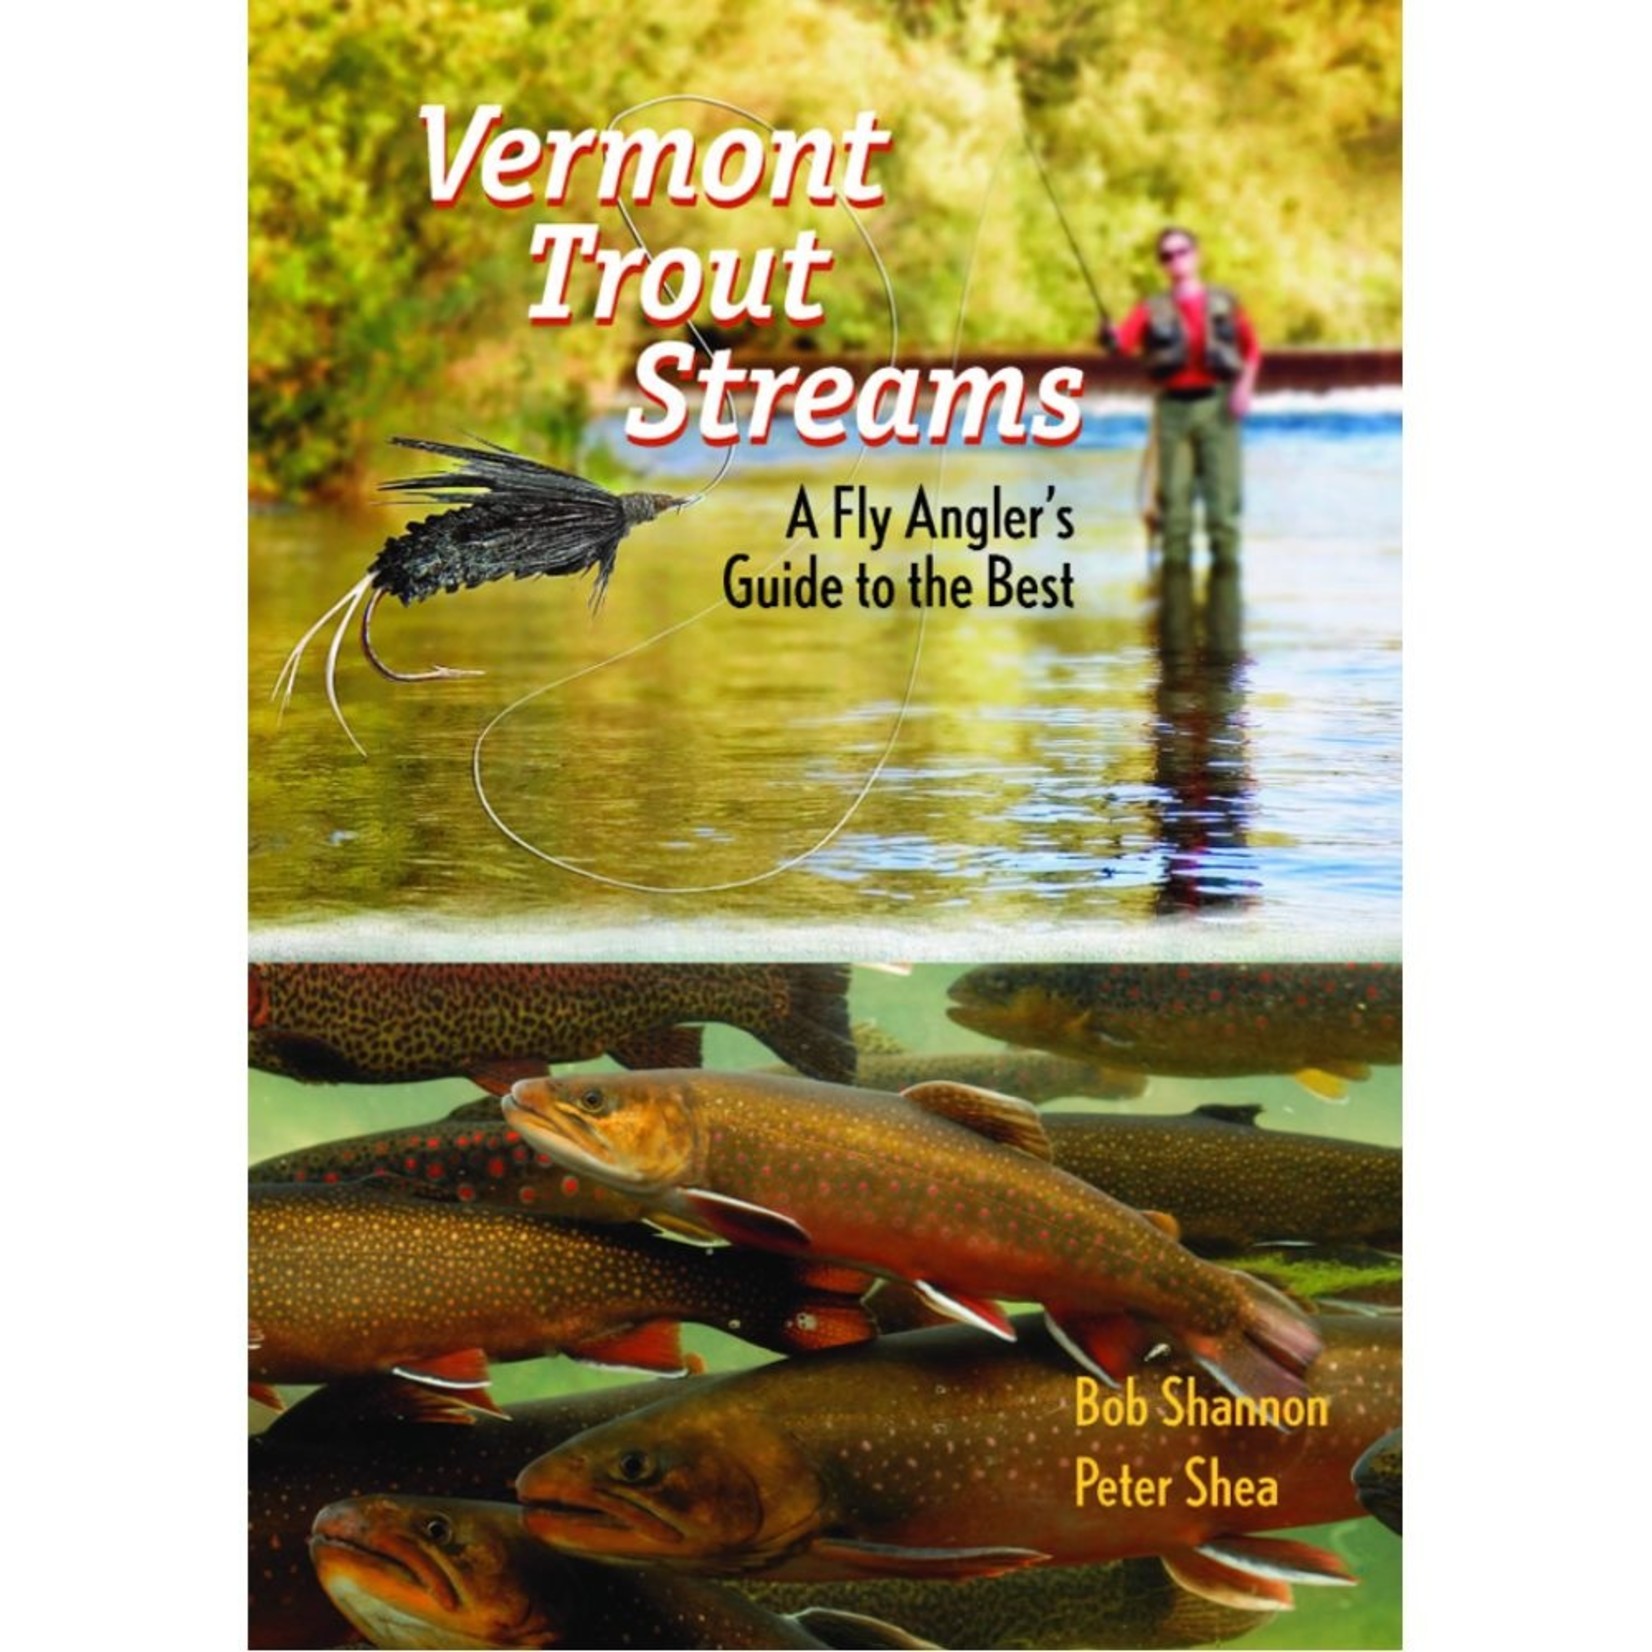 Vermont Trout Streams A Fly Angler's Guide to the Best